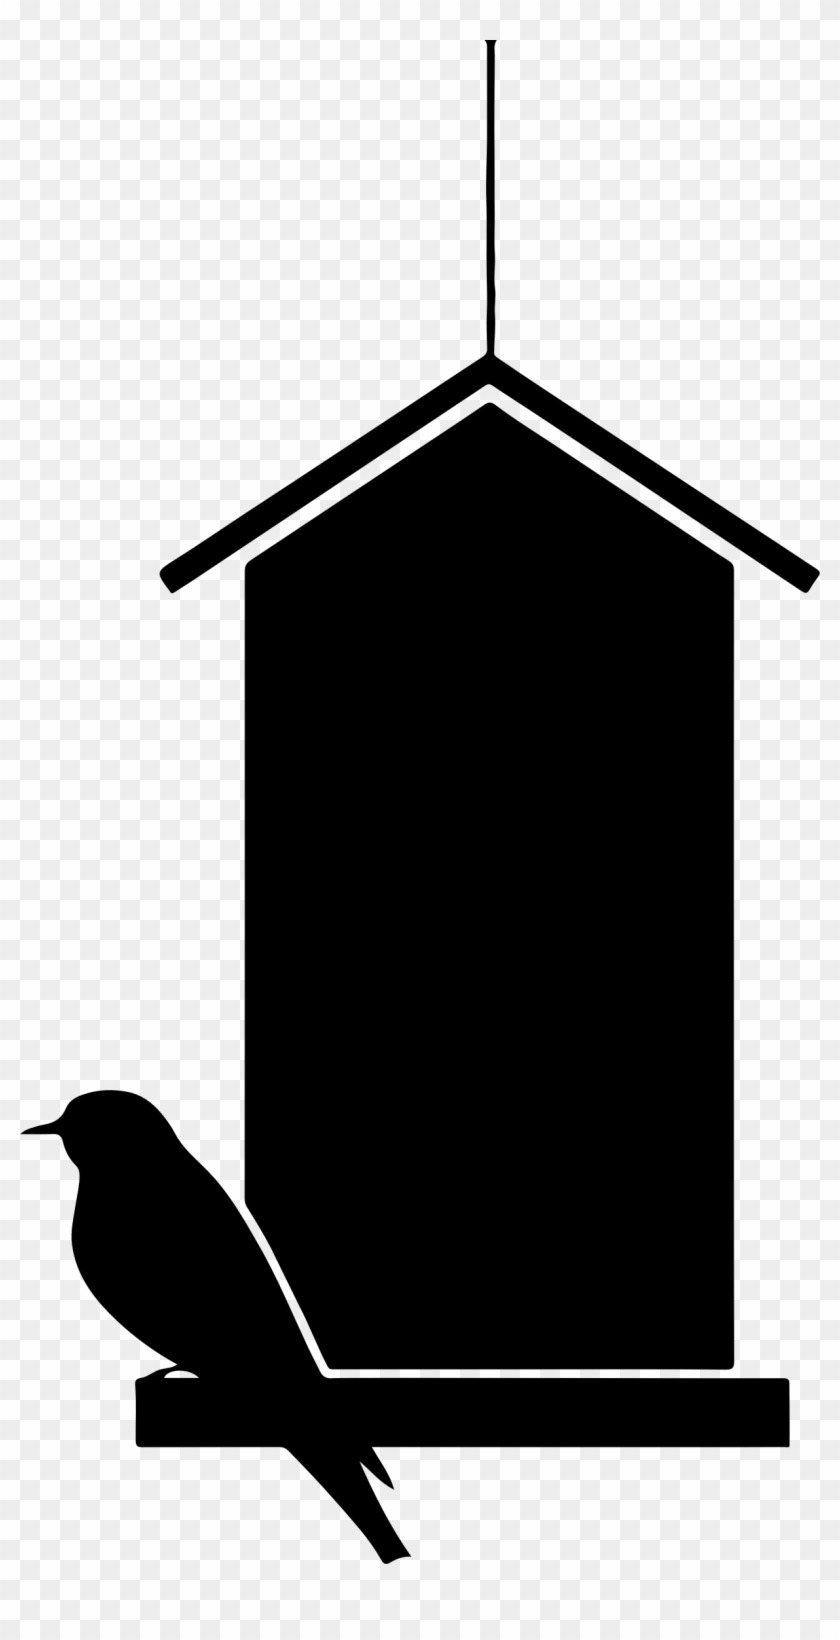 Clipart - Birdhouse Black And White #189884